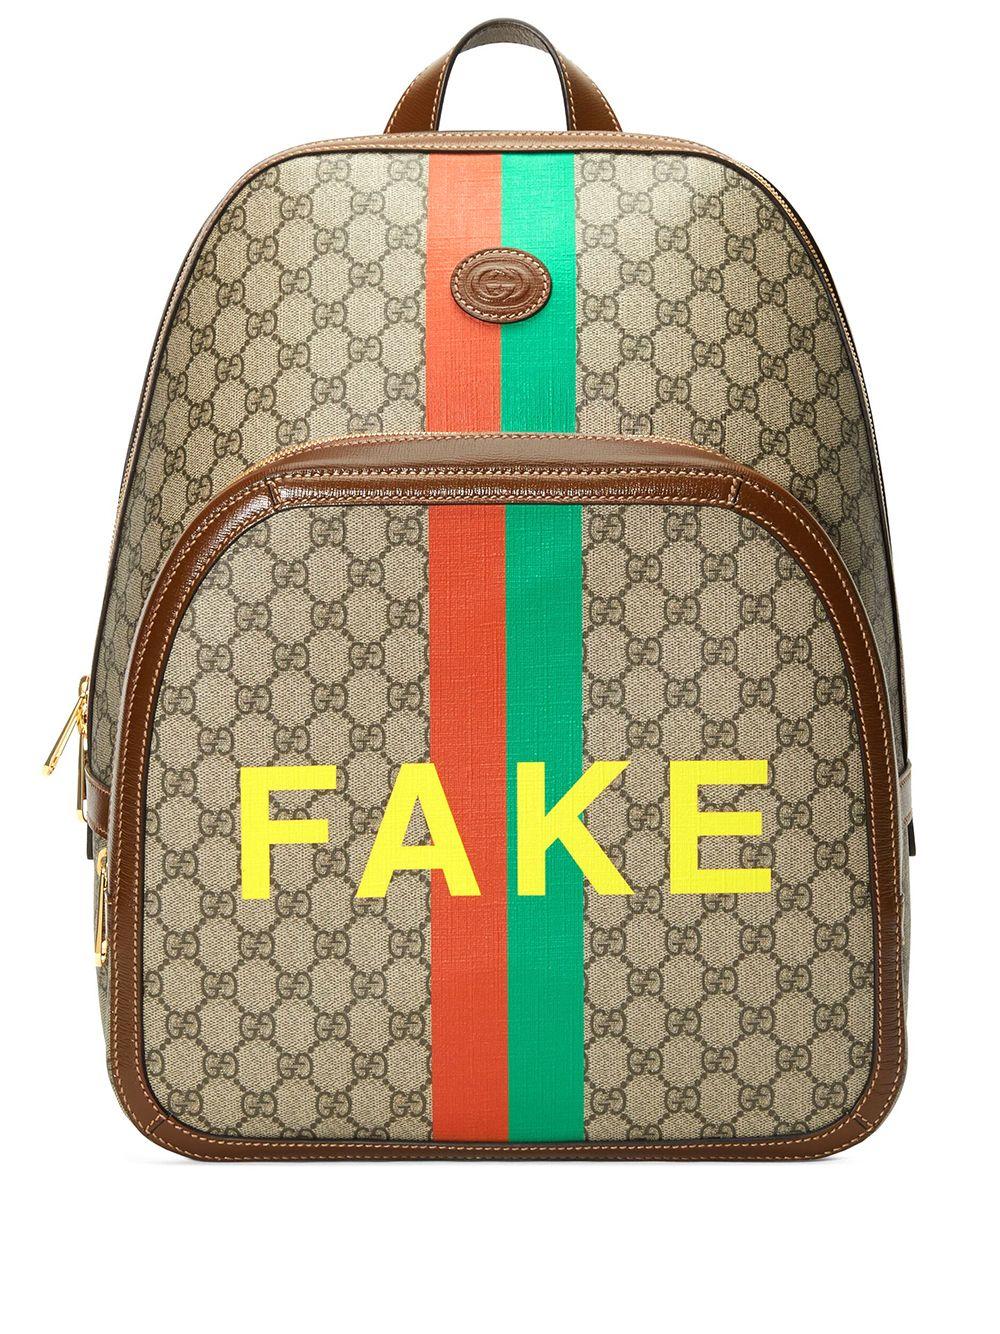 Gucci GG Supreme Fabric Backpack in Natural for Men | Lyst